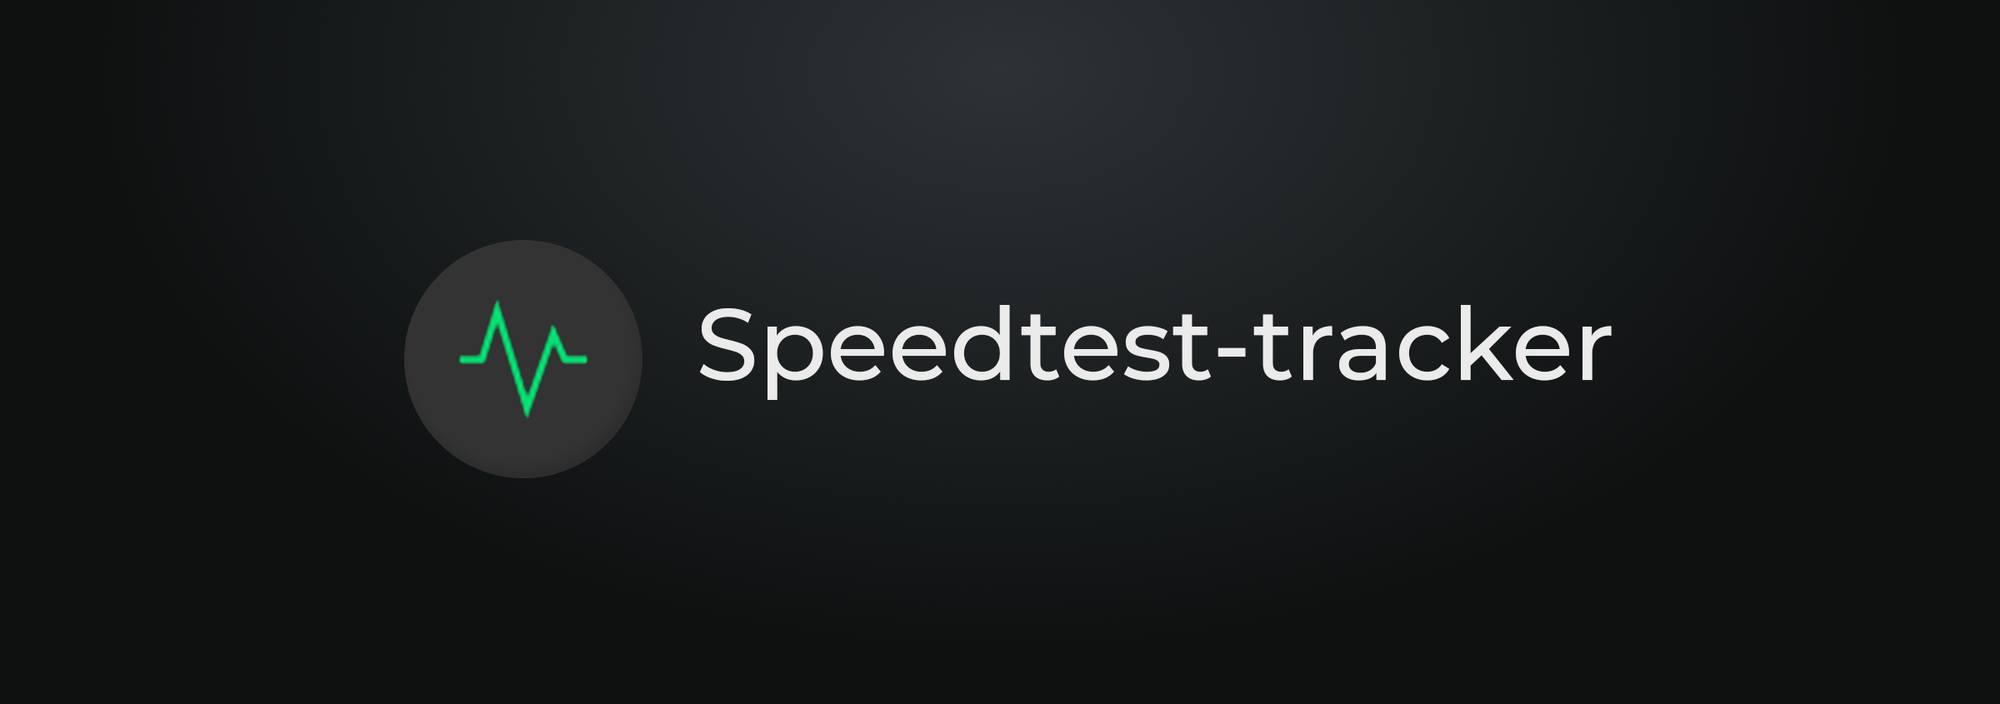 Speedtest-Tracker: Continuously track your internet speed